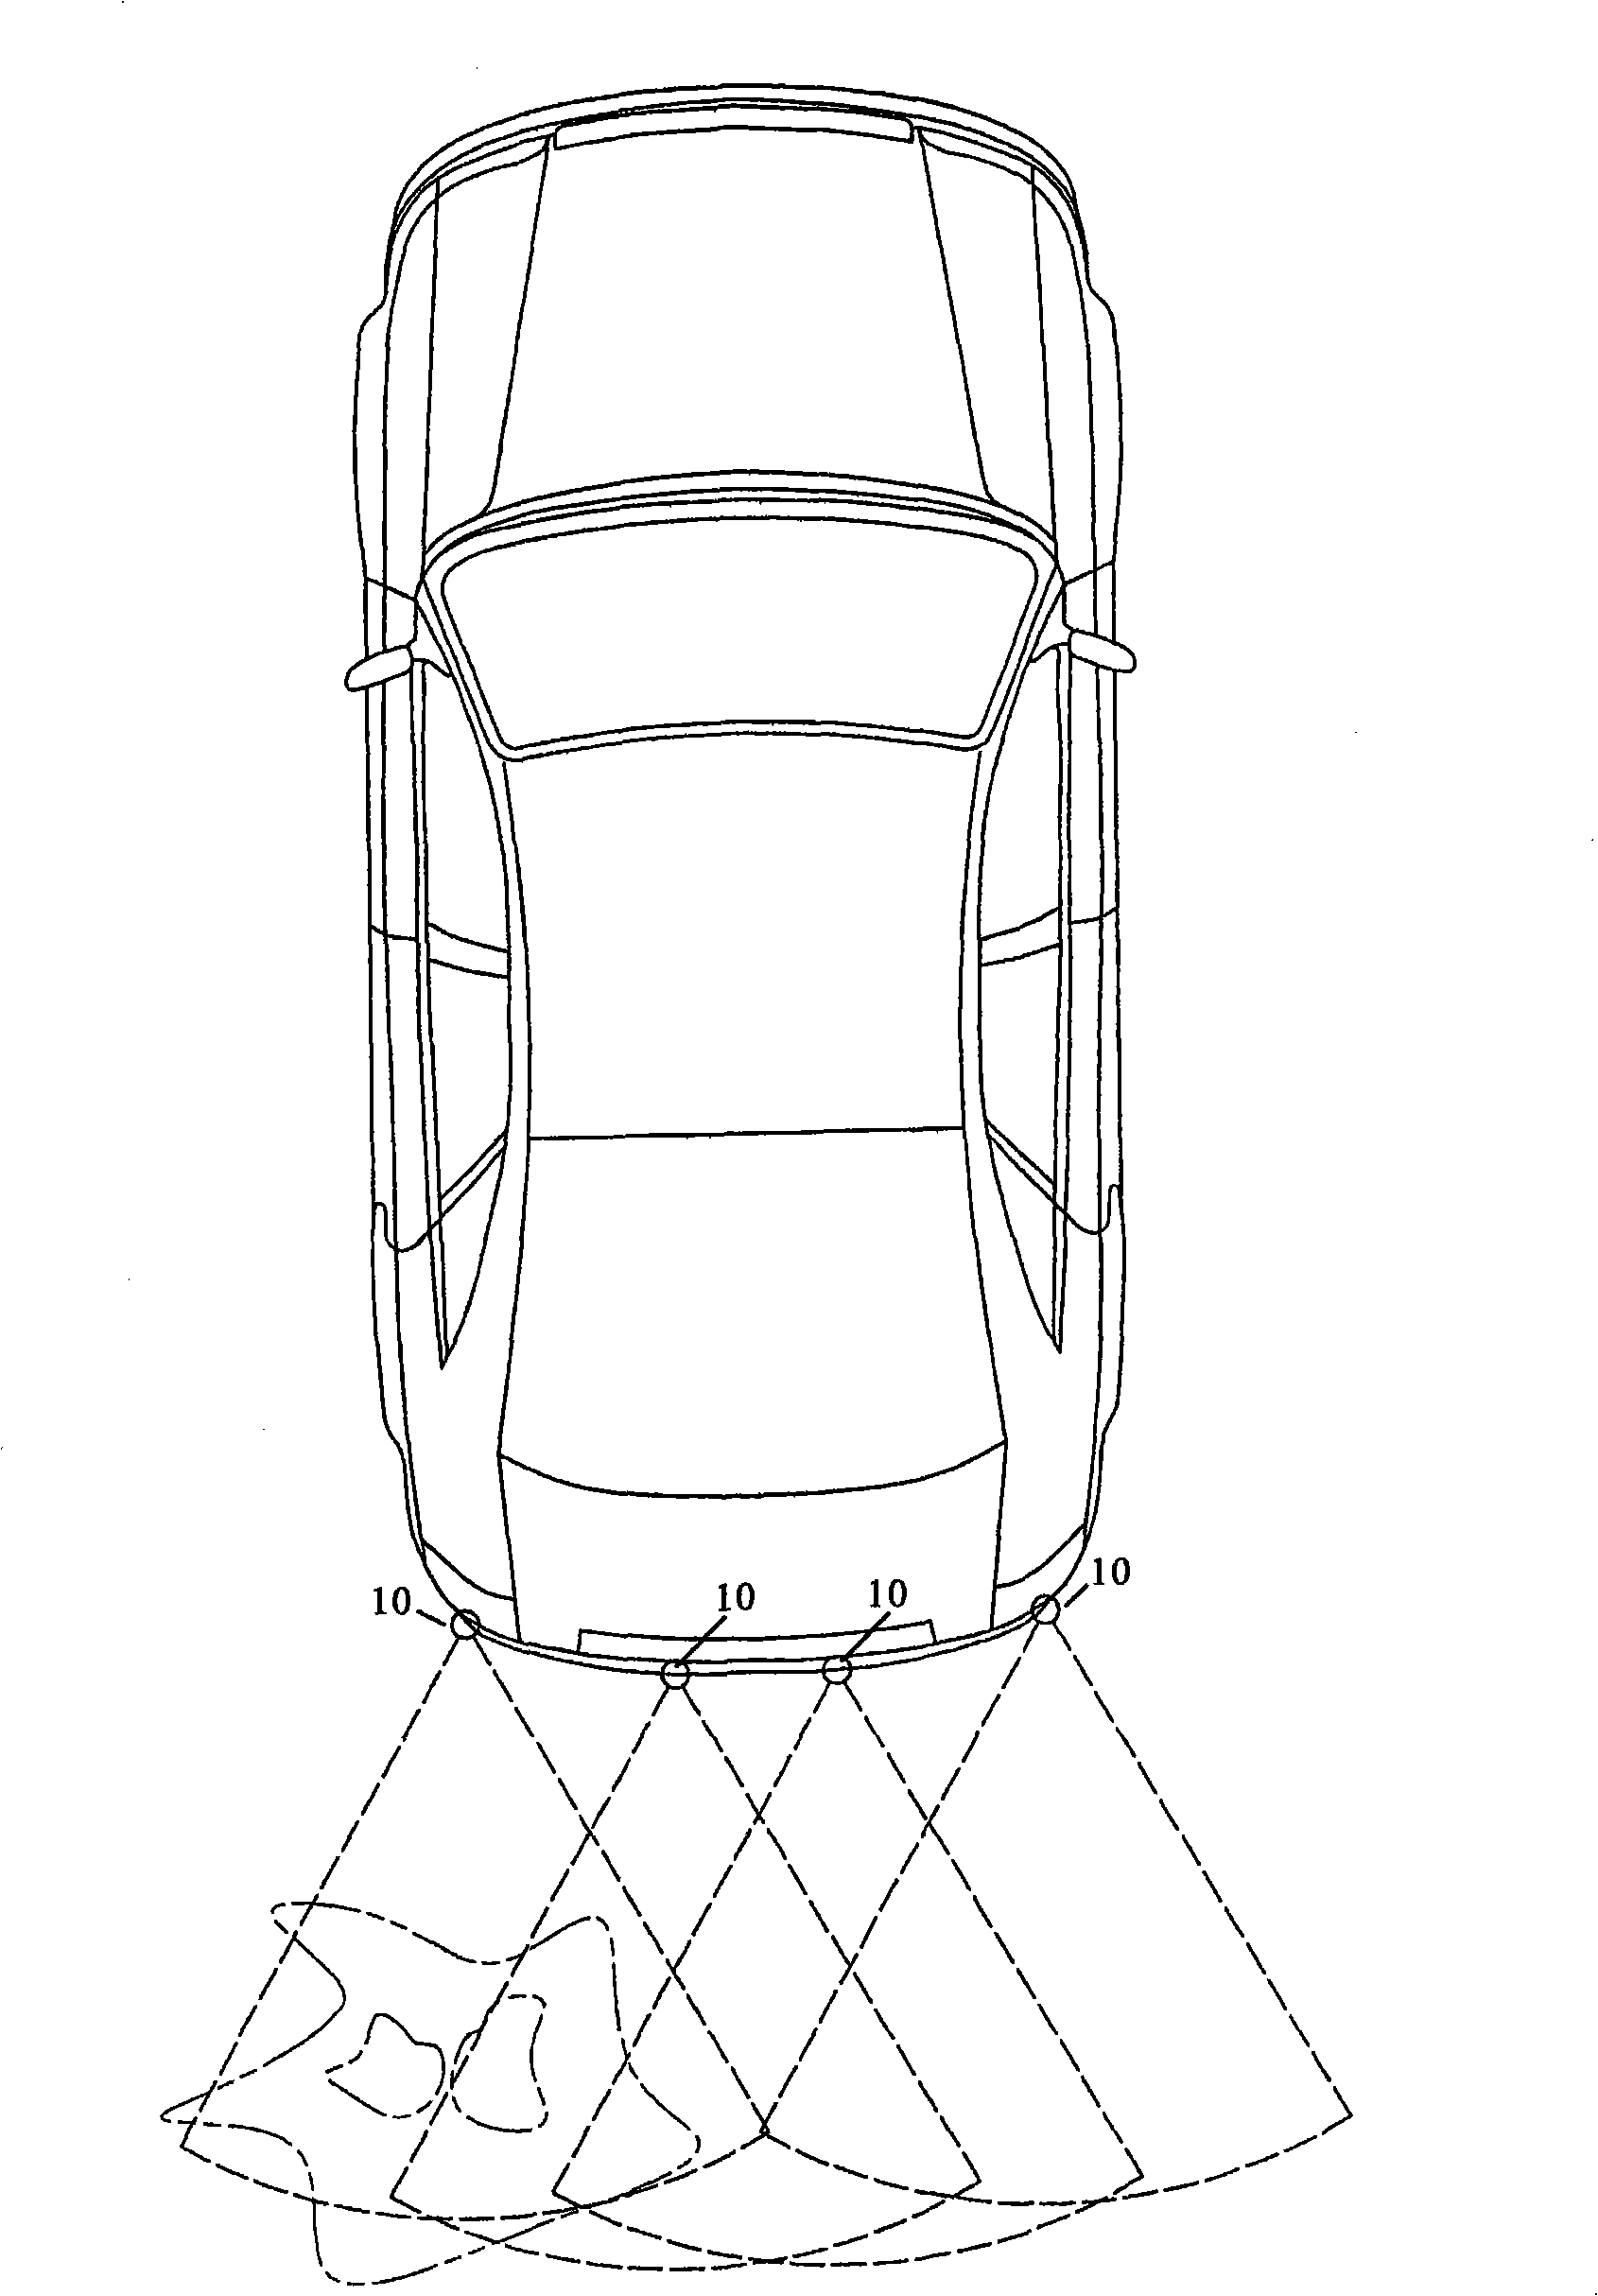 Vehicular obstacle detection device capable of indicating obstacle distance